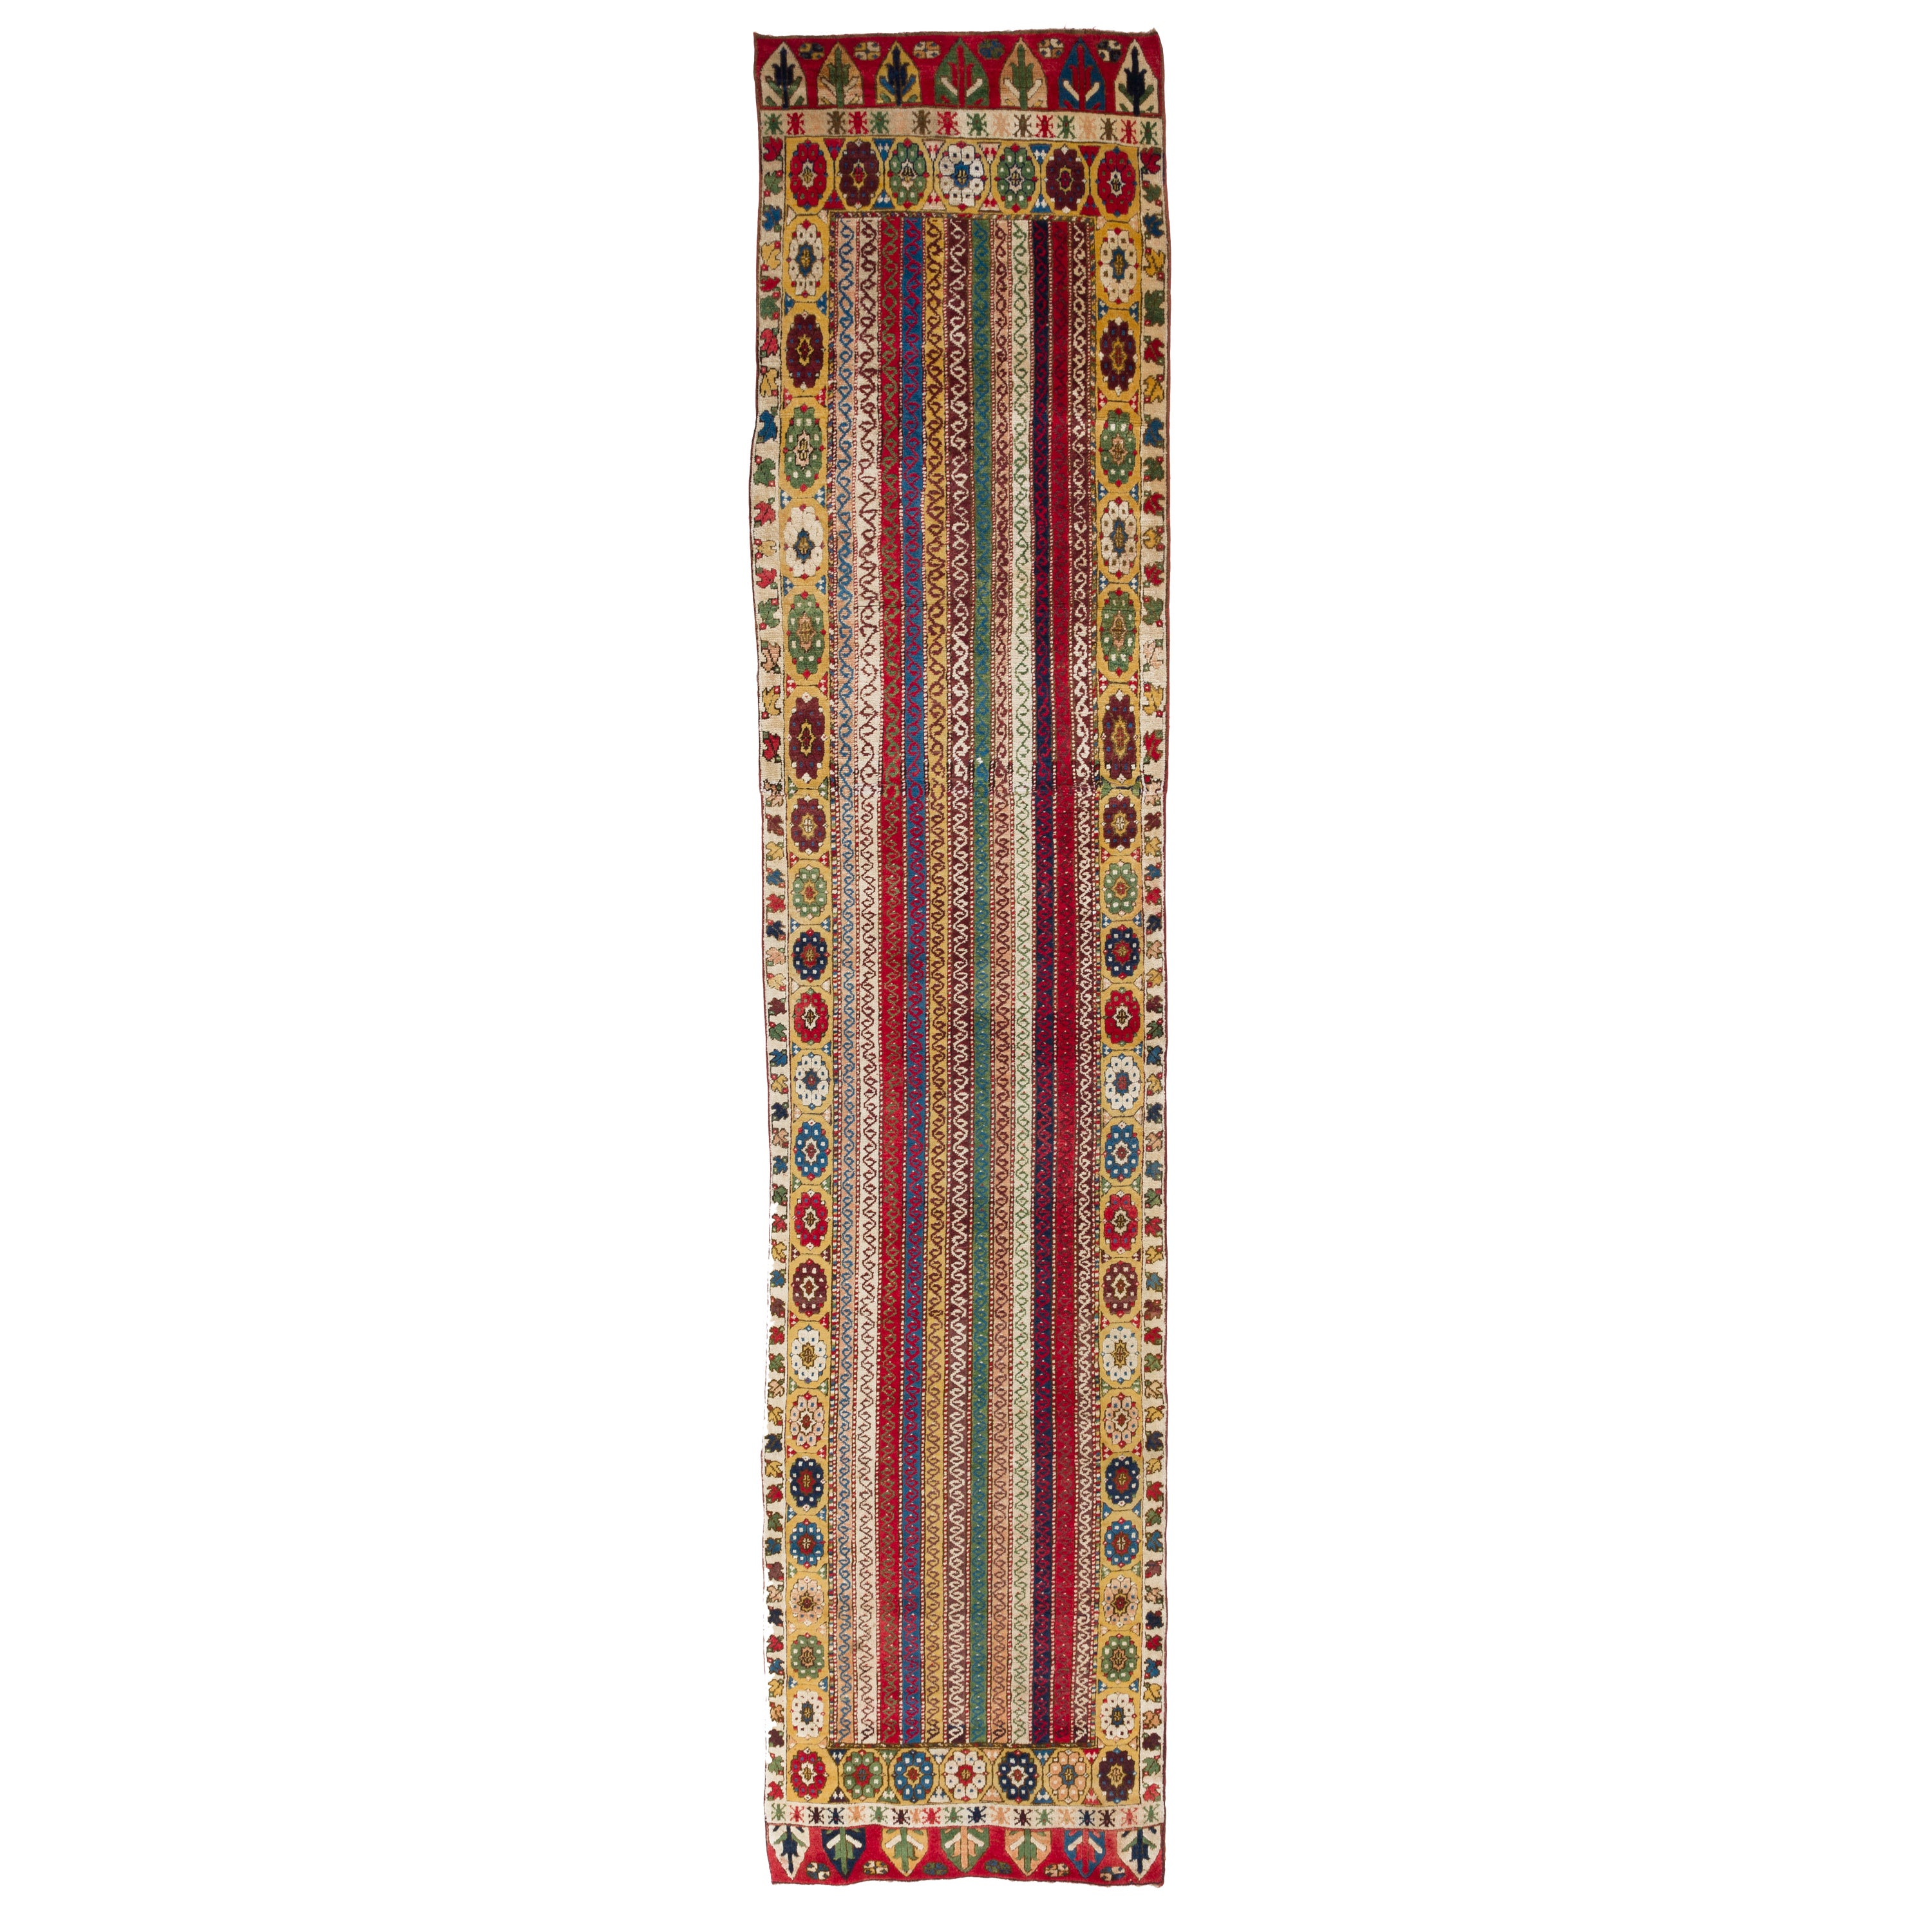 3.2x14.4 Ft Handmade Runner Rug from Konya / Turkey. All Wool and Natural Dyes For Sale